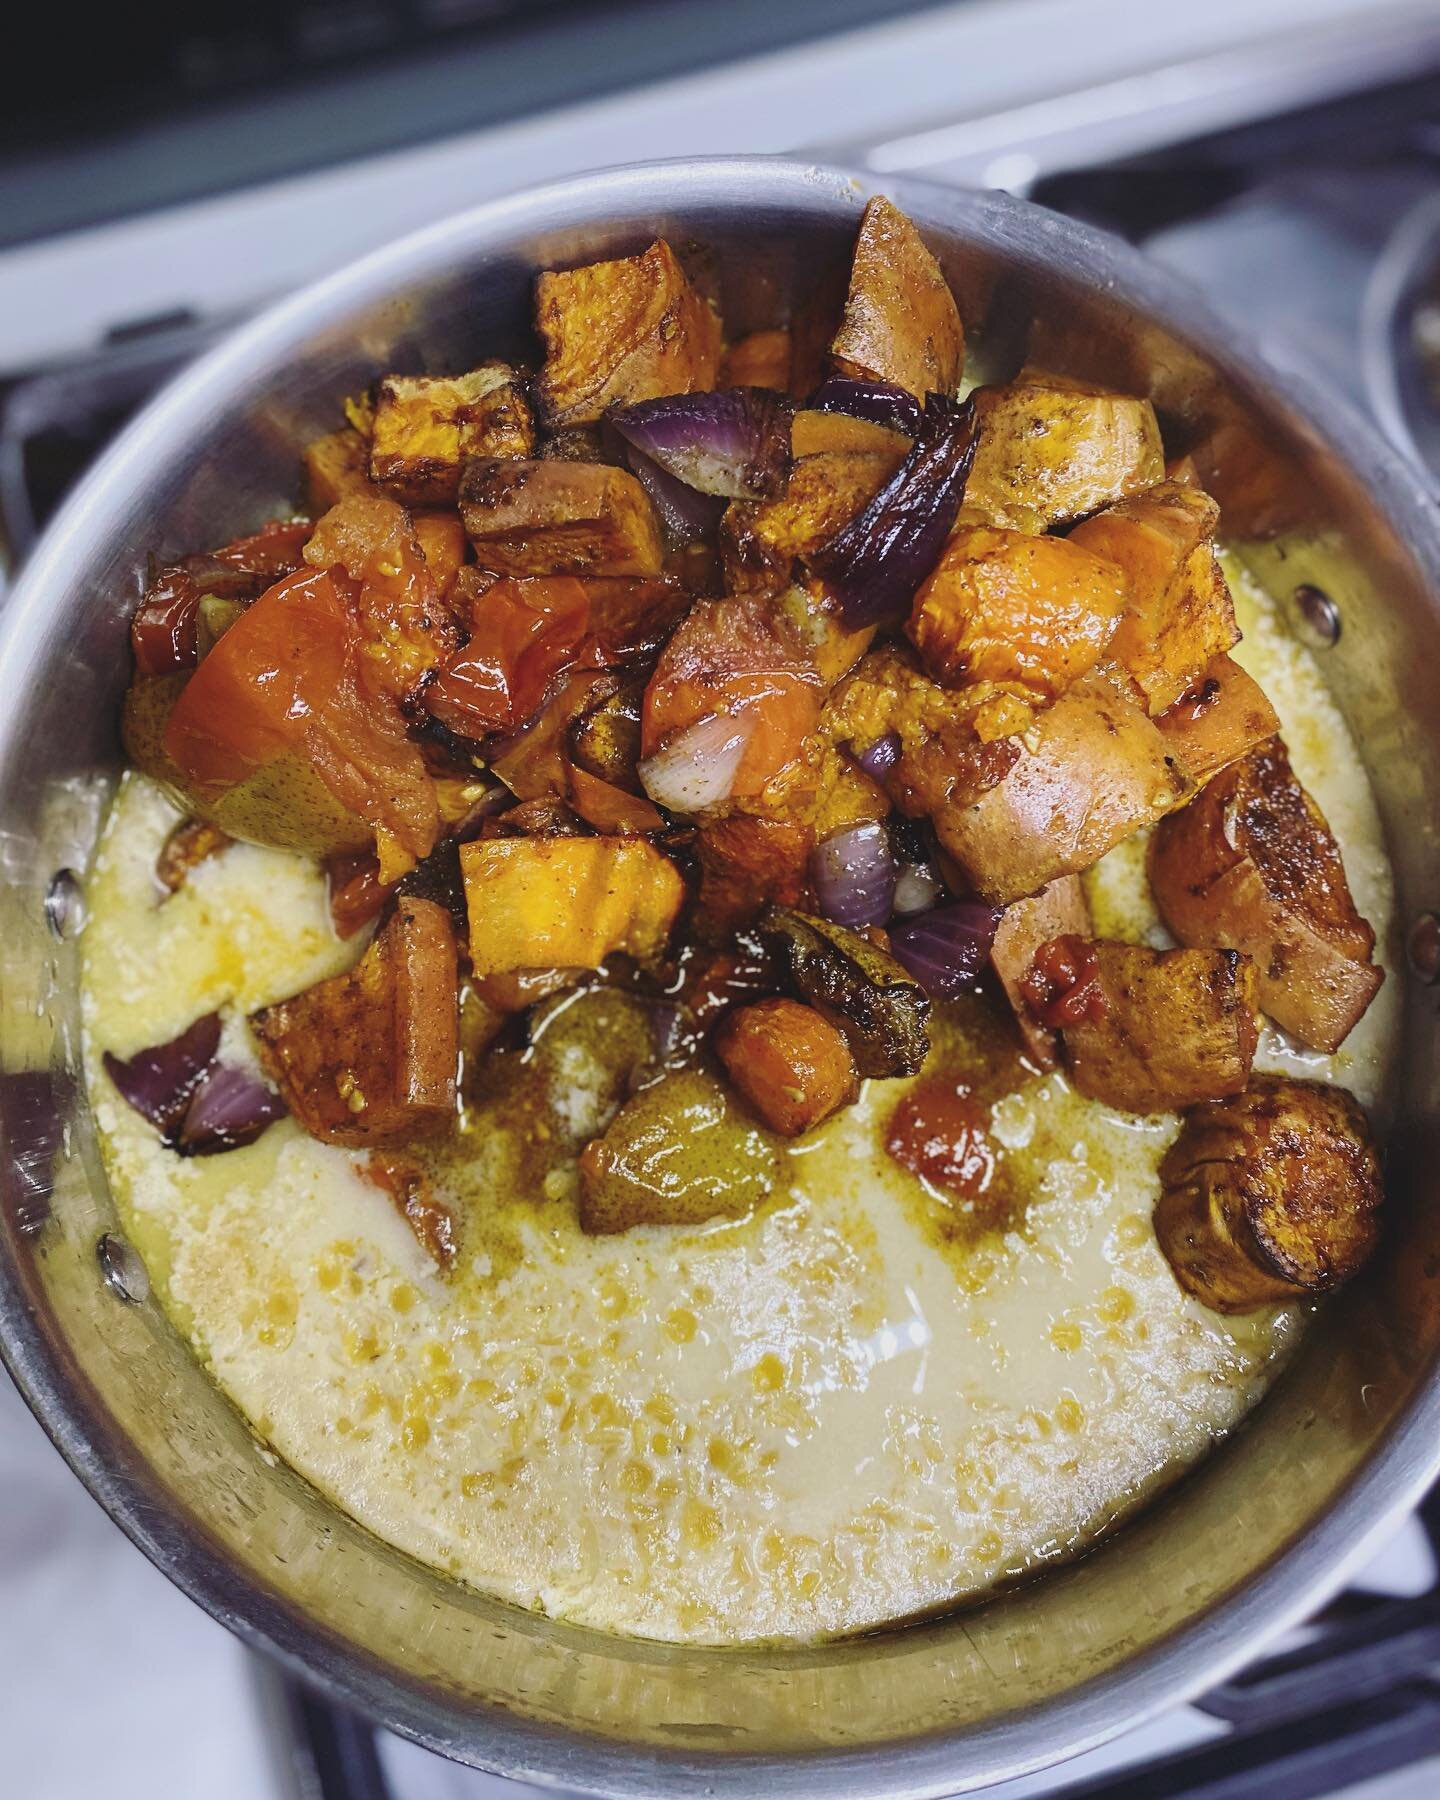 autumnal vibes for clients this week - making @nurturetheseed&rsquo;s spiced vegetable and lentil soup w deep golden chicken broth and crusty sourdough. this soup has such a unique flavour, the pear is genius.